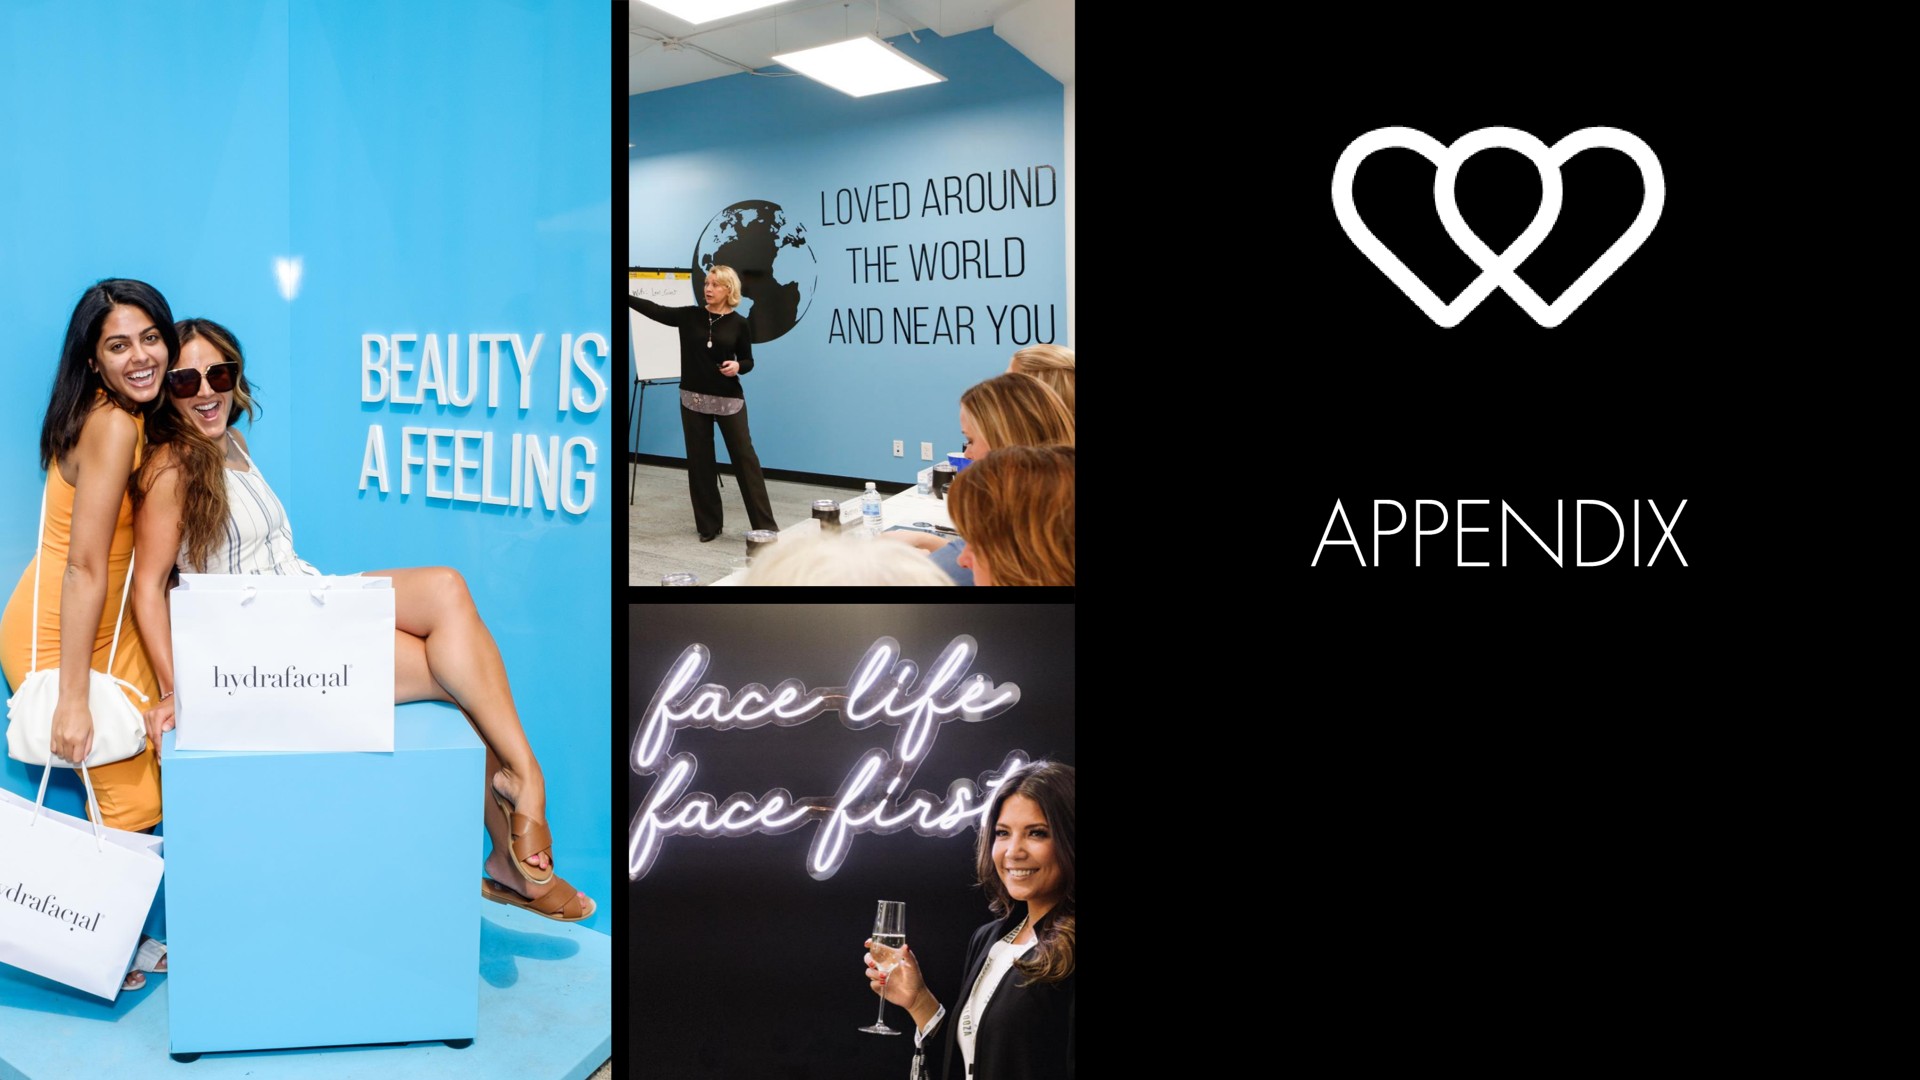 loved around the world near you appendix | Hydrafacial